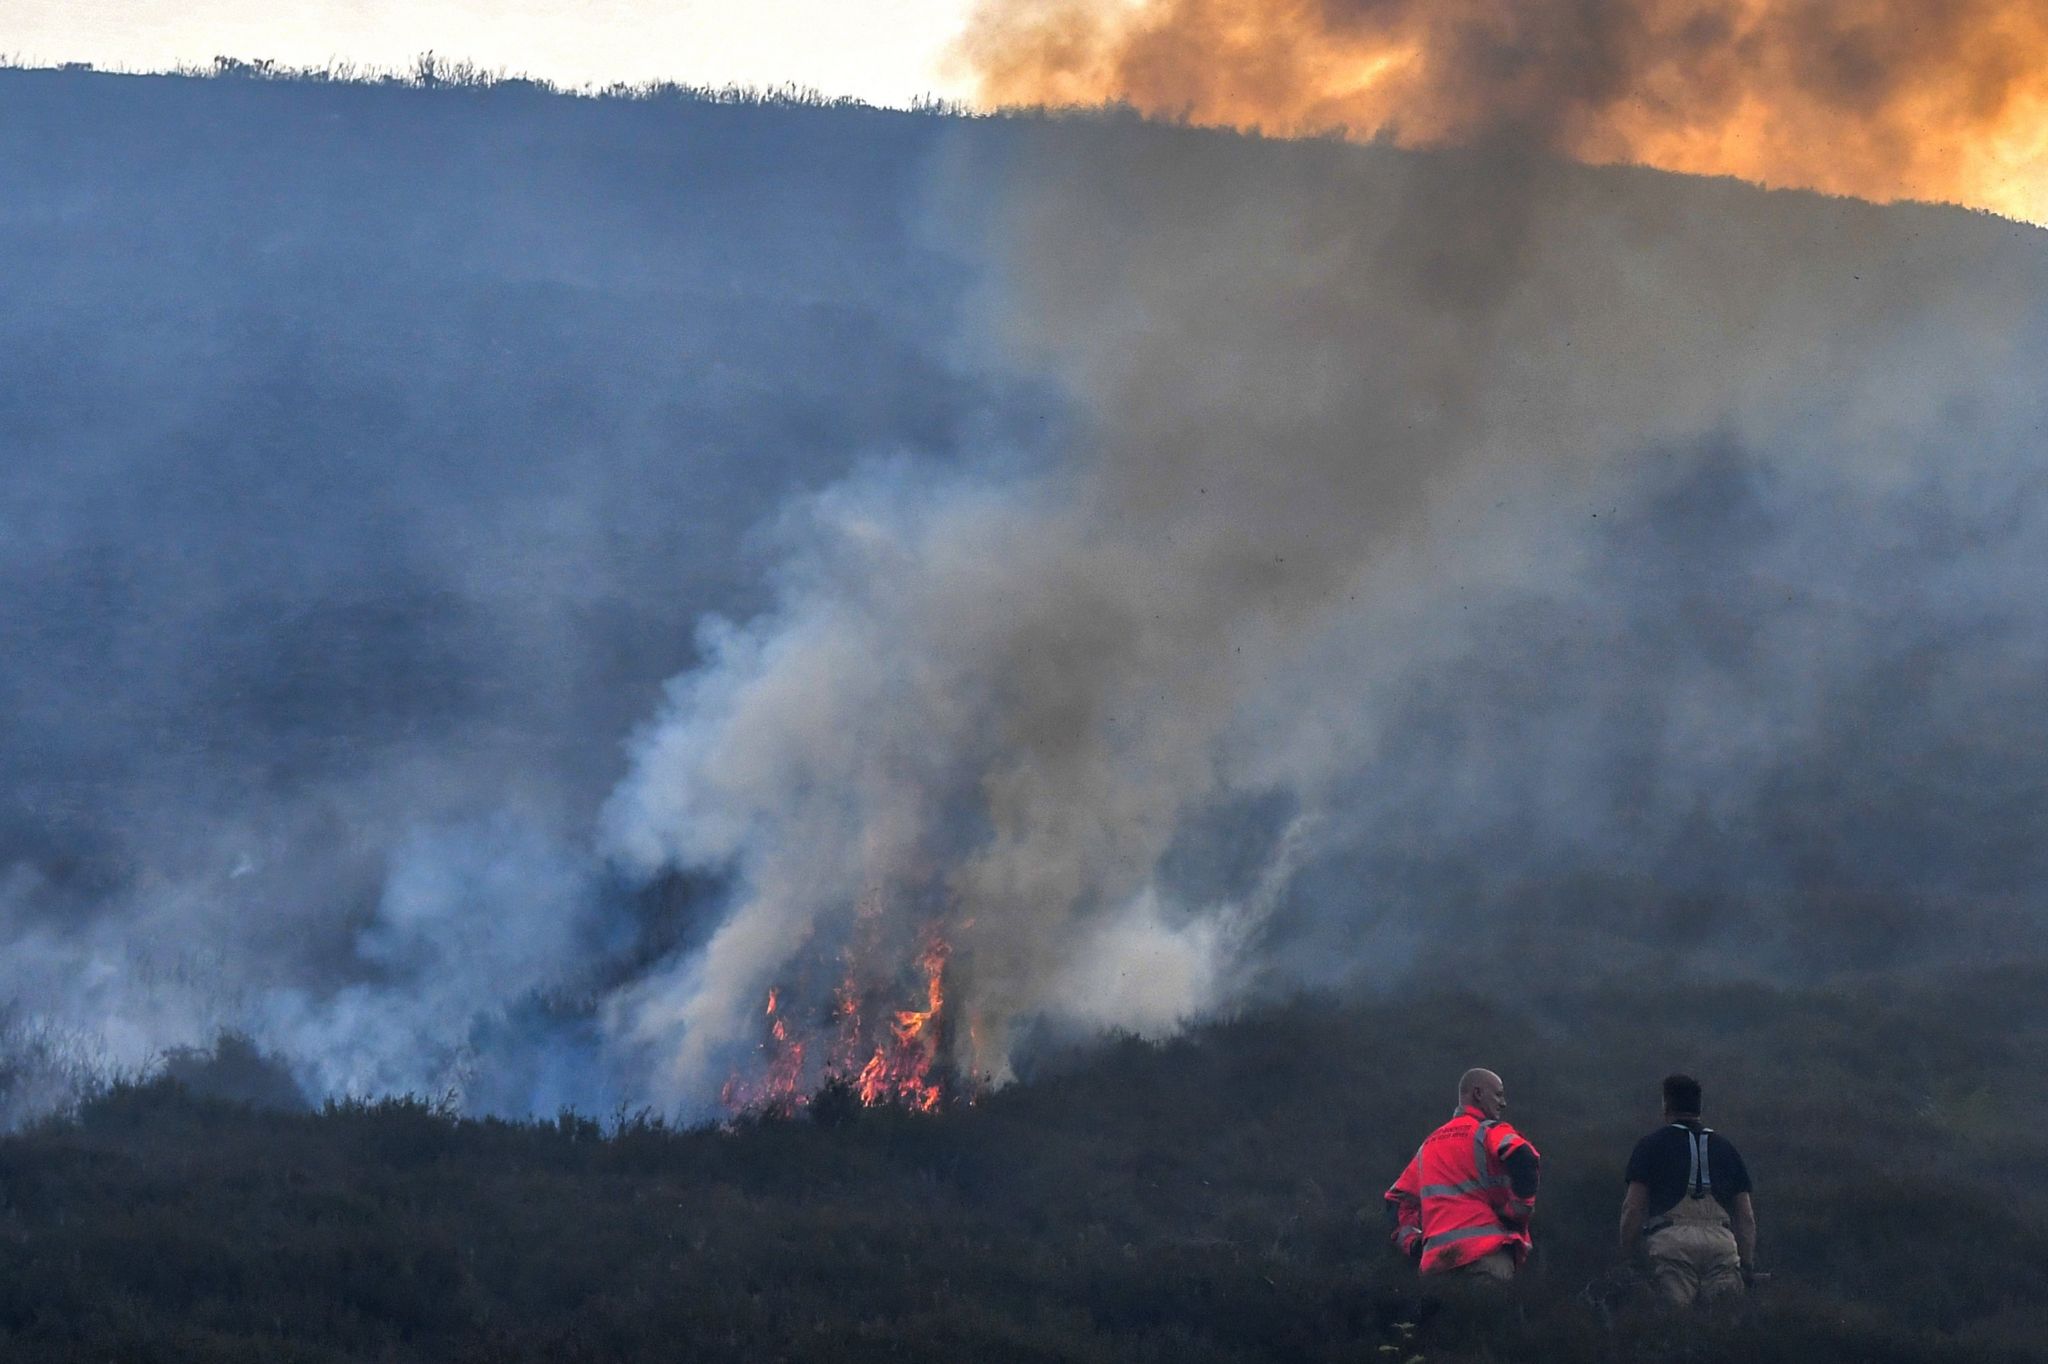 Fire crews continue to fight a large wildfire on the moors above Stalybridge